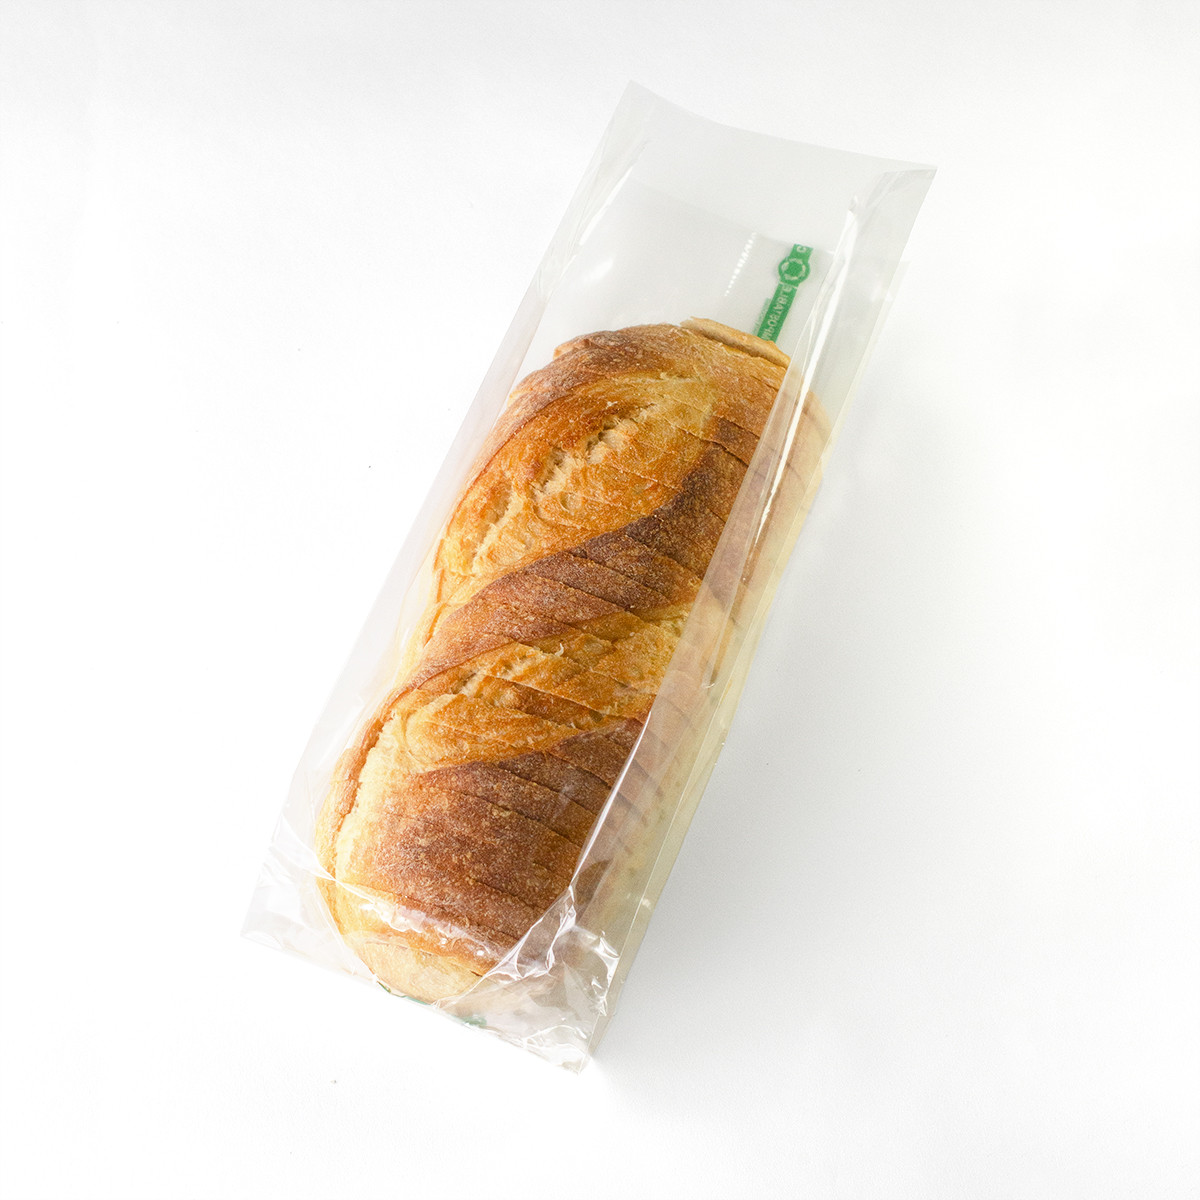 Clear Plastic Bag Bread, Packing Sandwiches